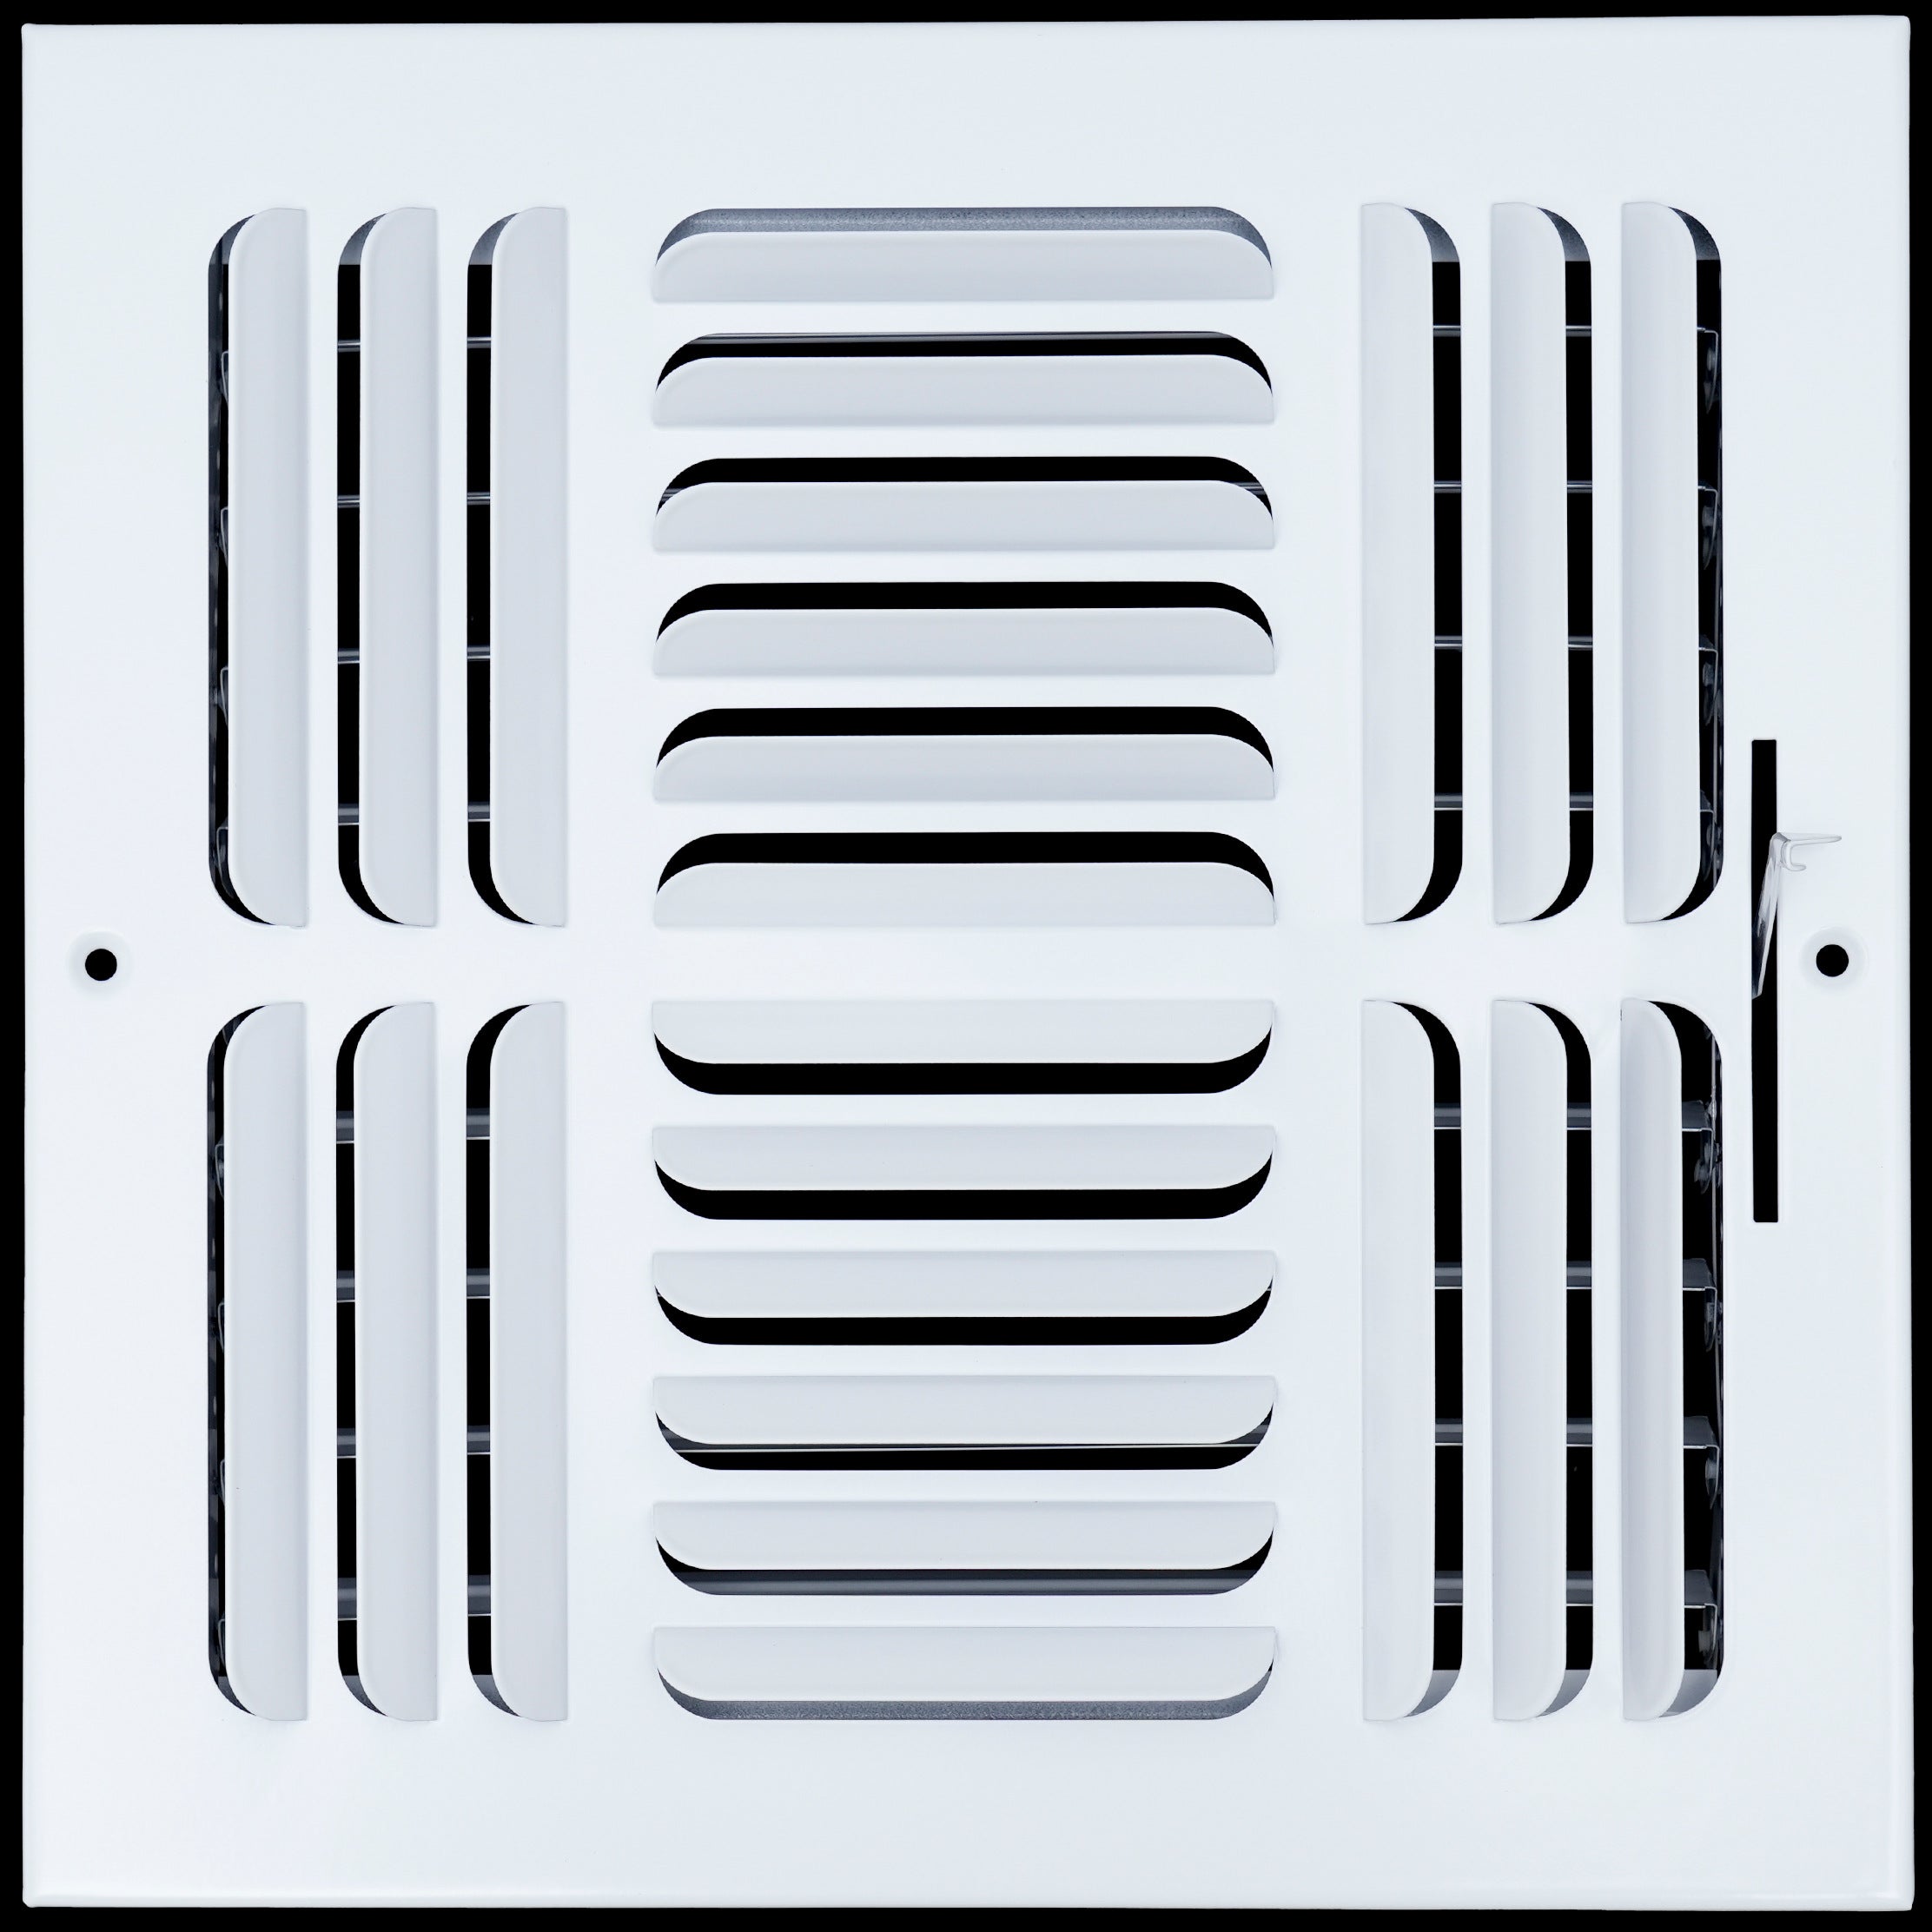 airgrilles 10"w x 10"h 4 way fixed curved blade air supply diffuser  -  register vent cover grill for sidewall and ceiling  -  white  -  outer dimensions: 11.75"w x 11.75"h hnd-cb-wh-4way-10x10  - 1